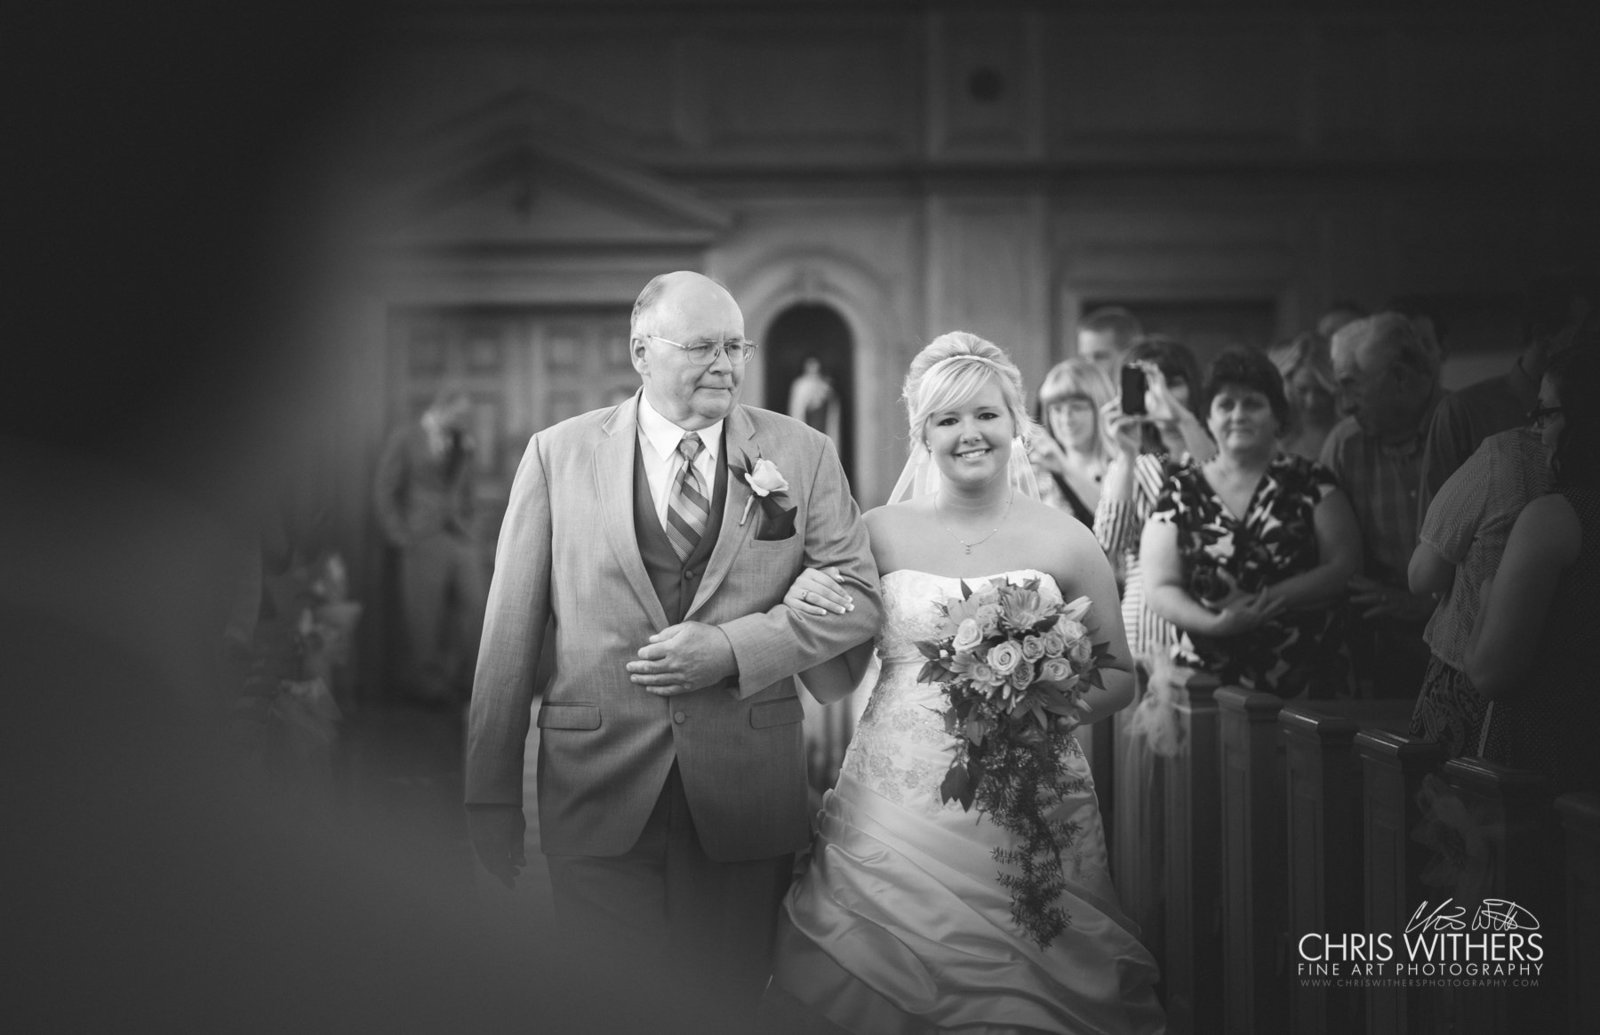 Springfield Illinois Wedding Photographer - Chris Withers Photography (13 of 159)